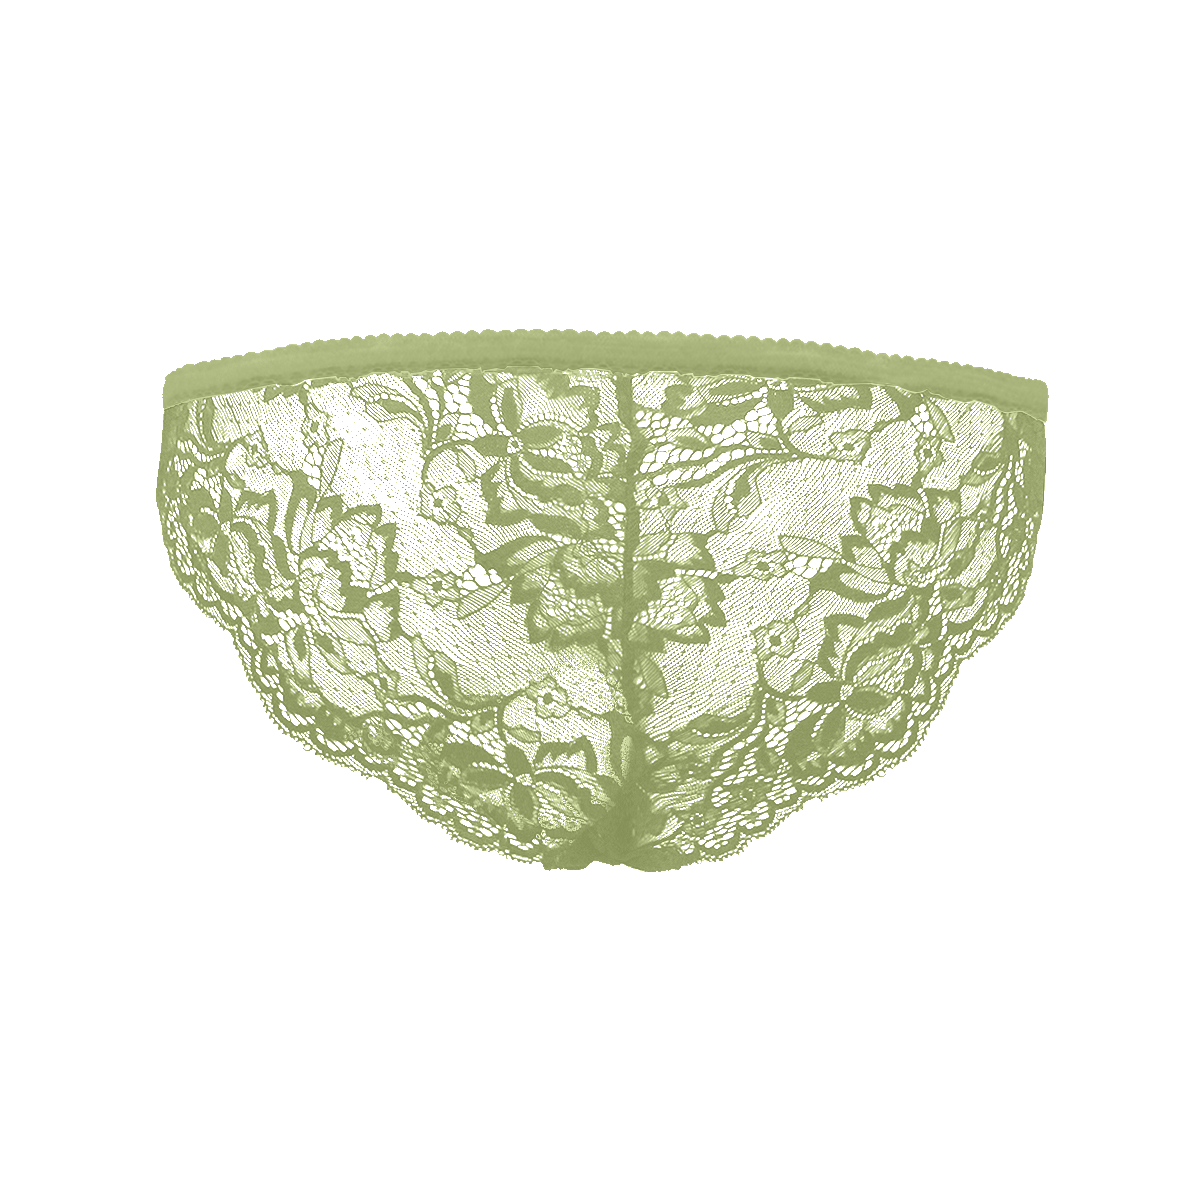 Purple And Gold Floral Green Women's Lace Panty (Model L41)